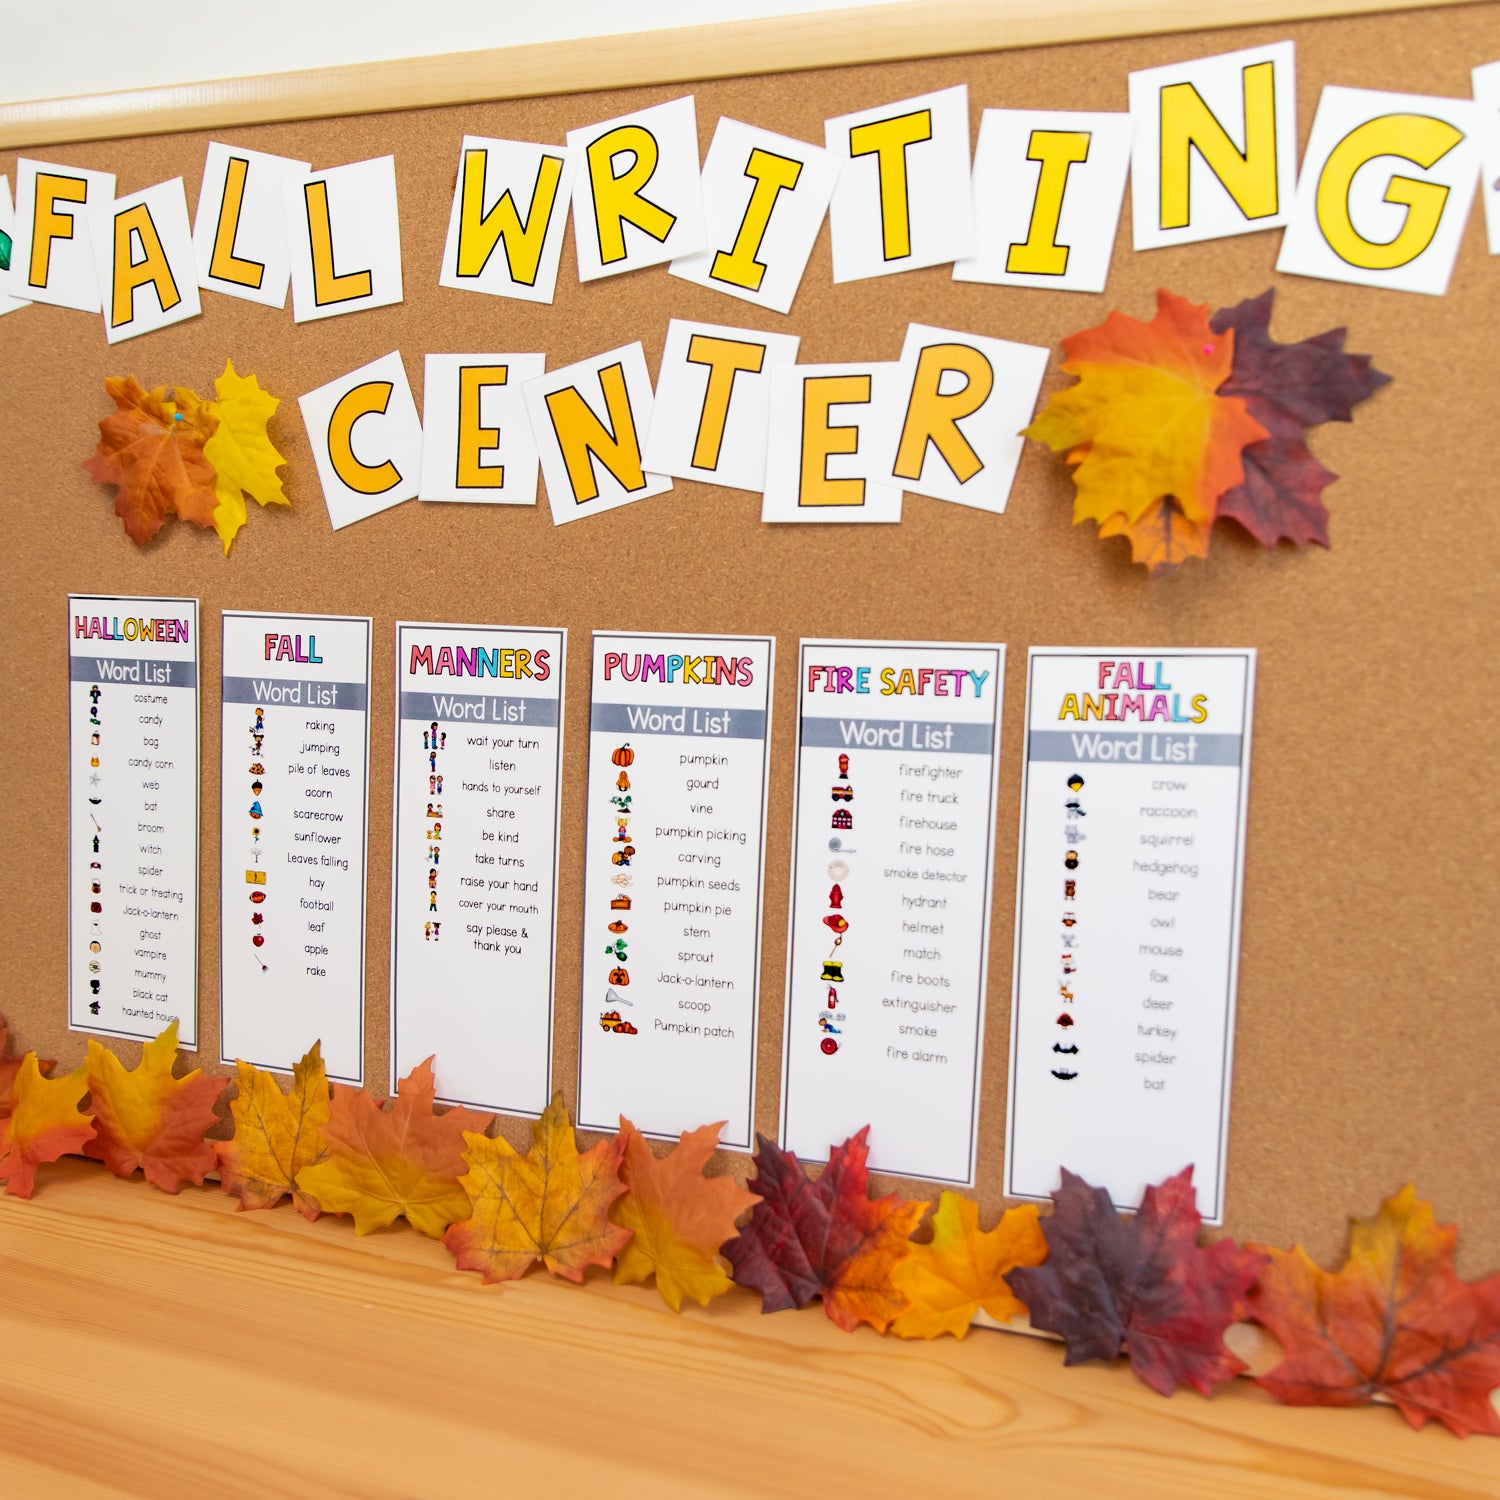 Fall Writing Center Prompts, Activities, Posters - Halloween, Fire Safety